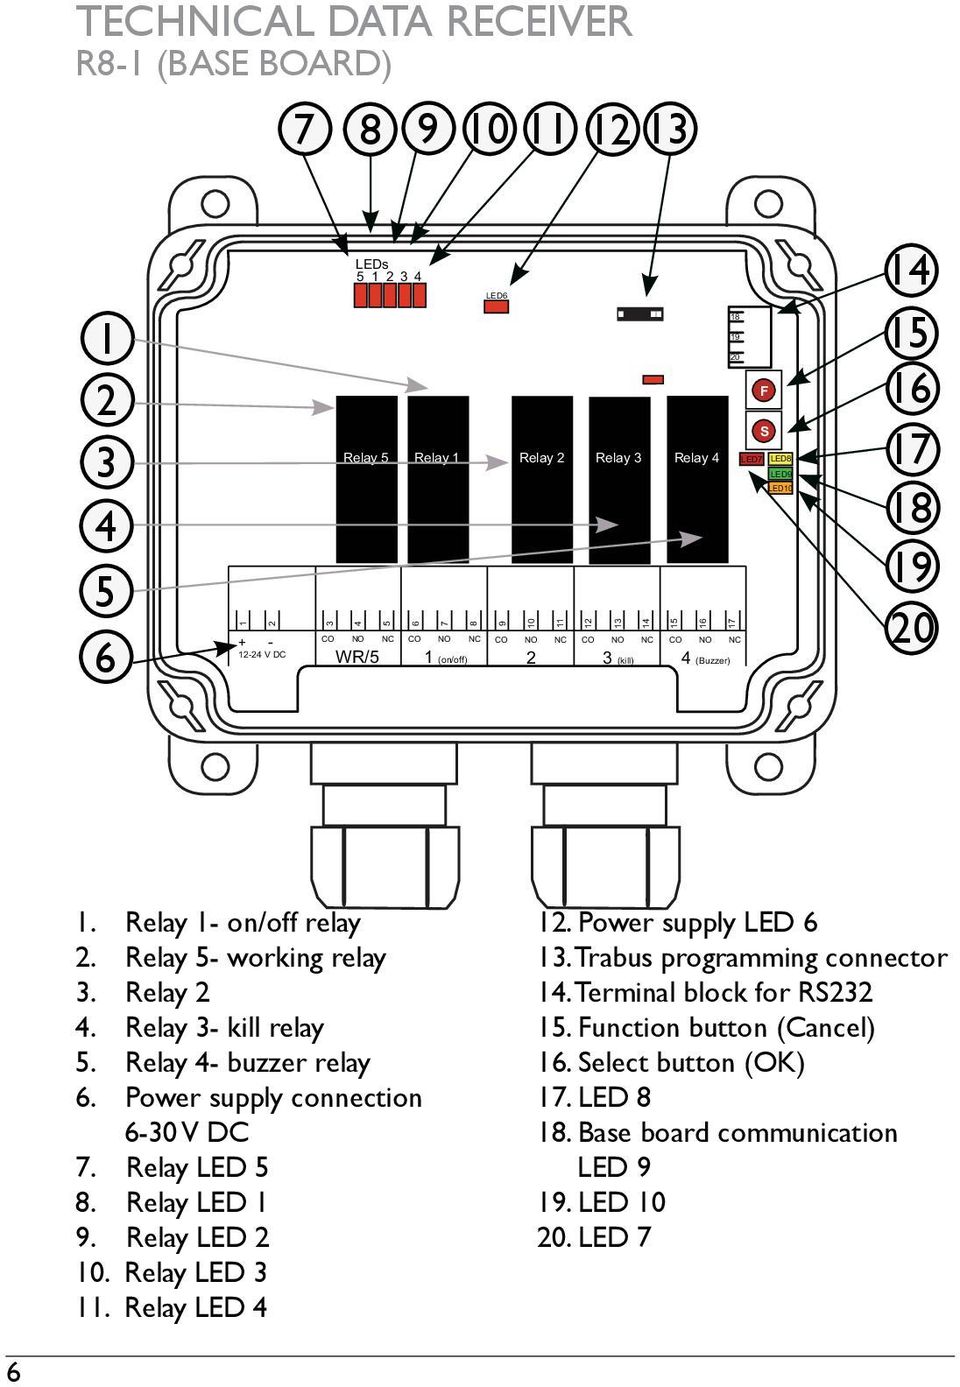 Relay - buzzer relay. Power supply connection -0 V DC 7. Relay LED 8. Relay LED 1 9. Relay LED 10. Relay LED 11. Relay LED 1. Power supply LED 1.